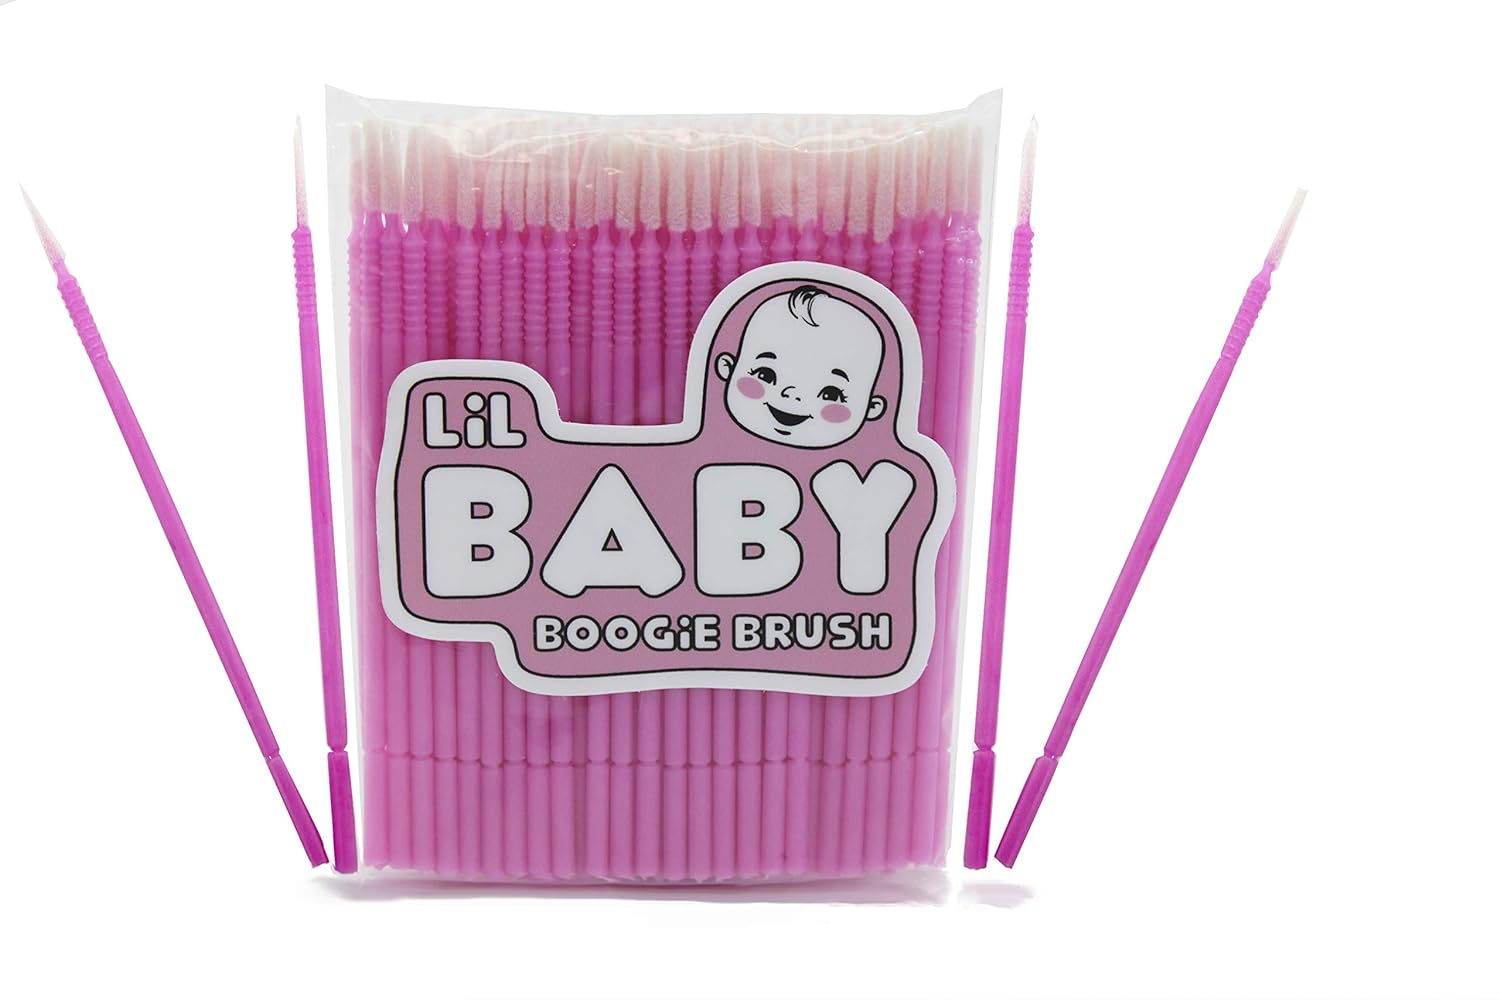 Baby Boogie and Eye Gookie Brushes, Felt Tip Mini Brushes Get in Hard to Reach Places and Clean Earwax, Boogies, and Gookies Easily (100 Pack) Pink